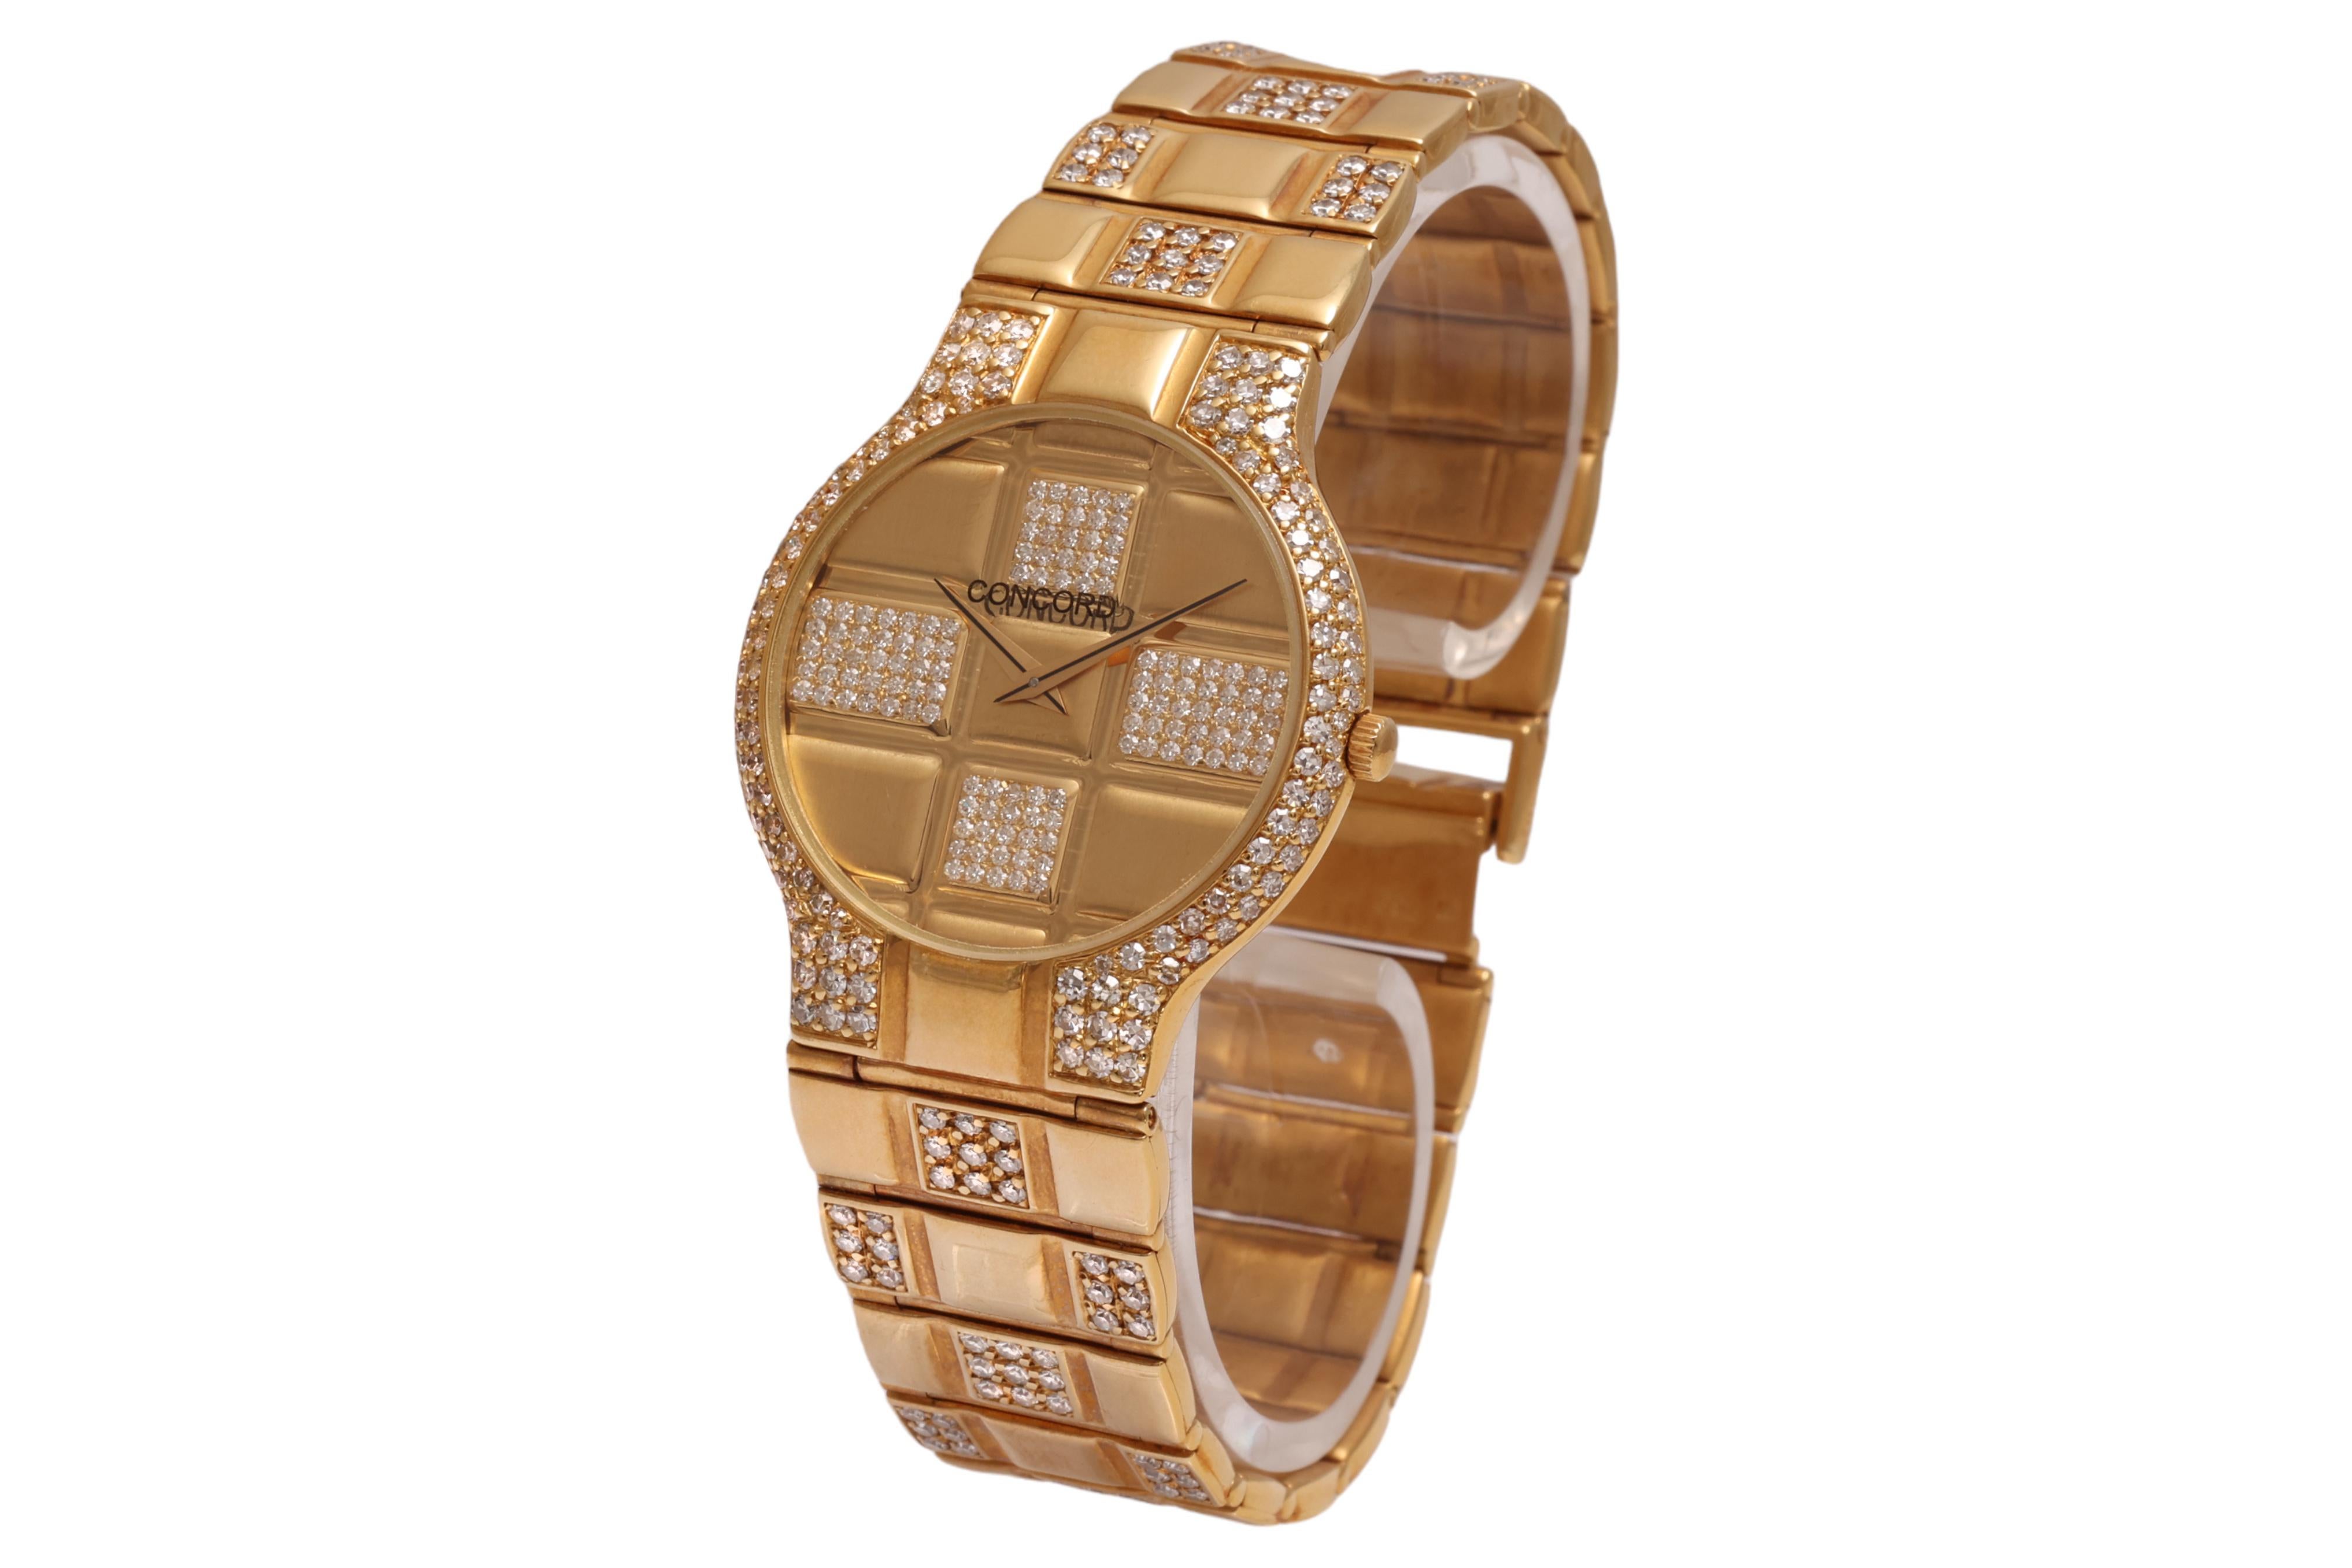 Brilliant Cut 18 Kt Solid Full Gold & Diamonds Concord Wrist Watch Full Set For Sale